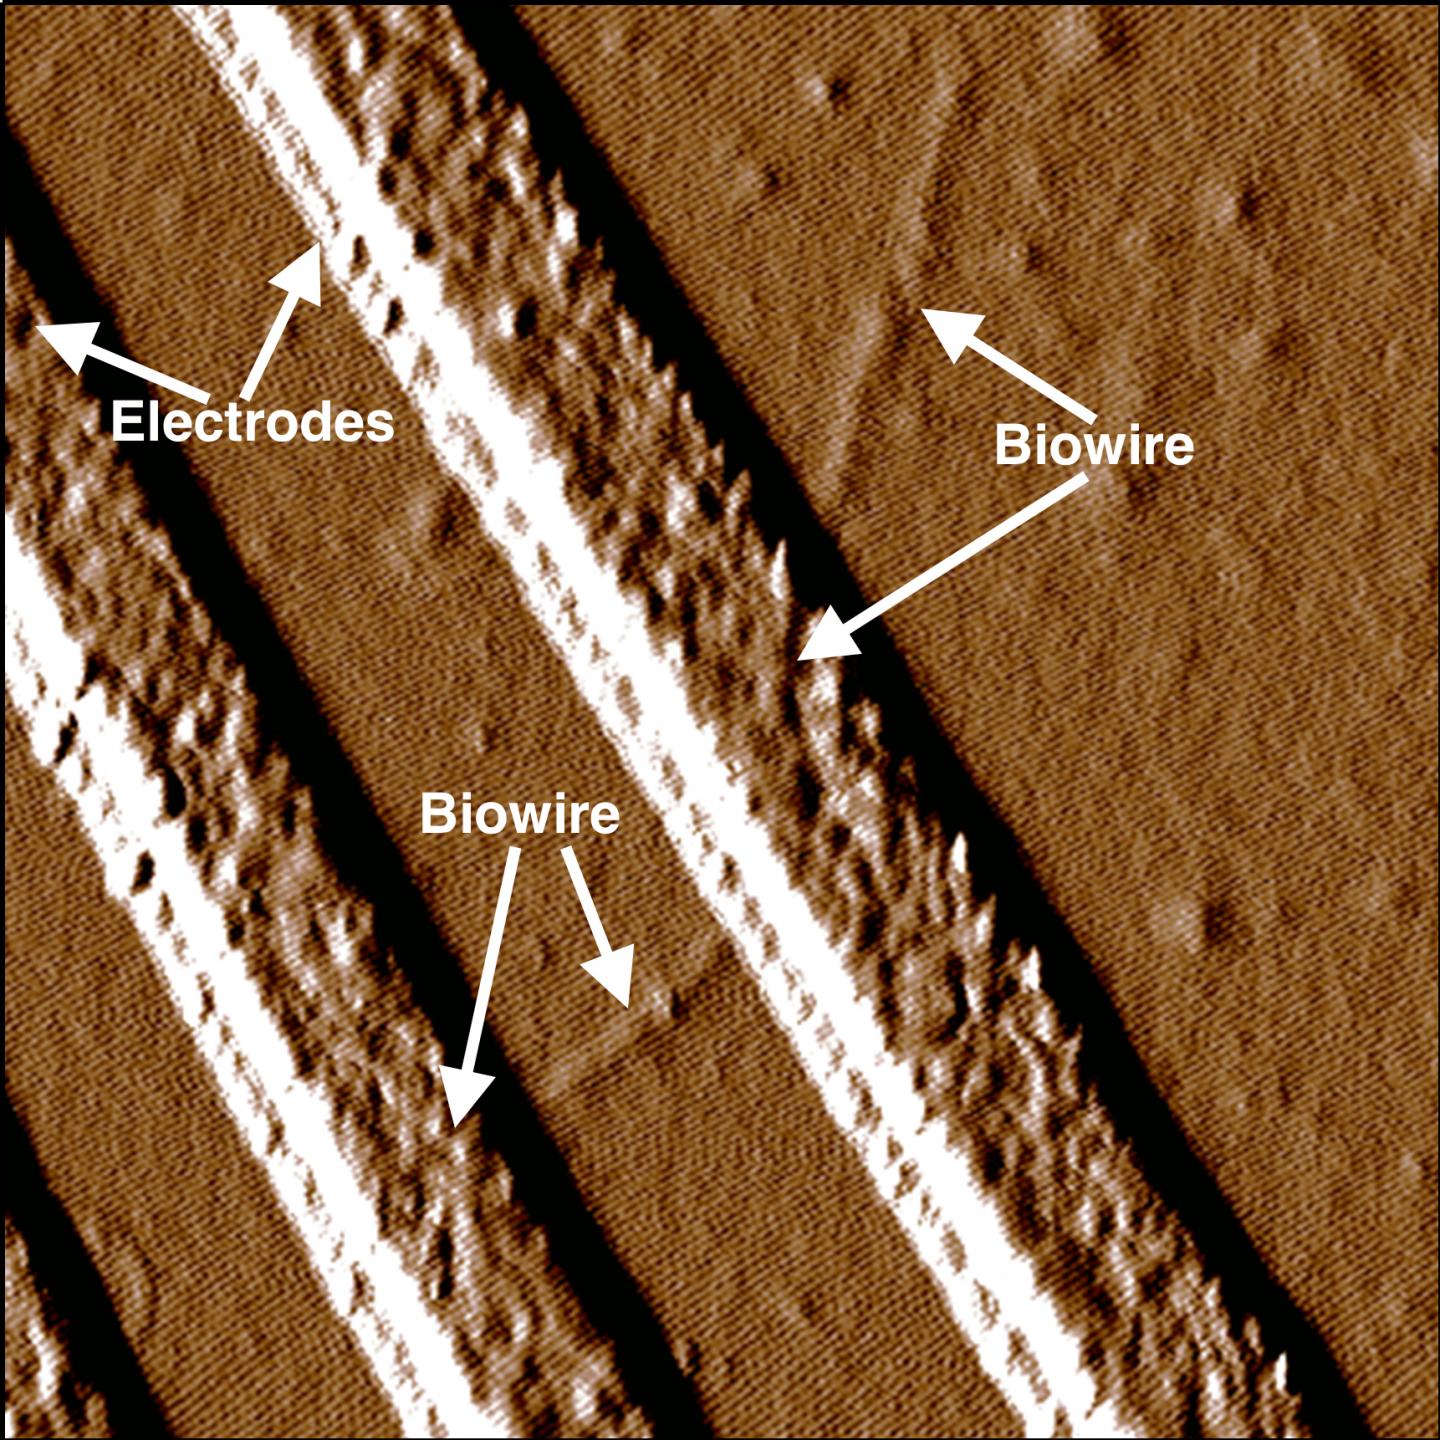 Caption: Synthetic biowire are making an electrical connection between two electrodes. Researchers led by microbiologist Derek Lovely at UMass Amherst say the wires, which rival the thinnest wires known to man, are produced from renewable, inexpensive feedstocks and avoid the harsh chemical processes typically used to produce nanoelectronic materials. Credit: UMass Amherst